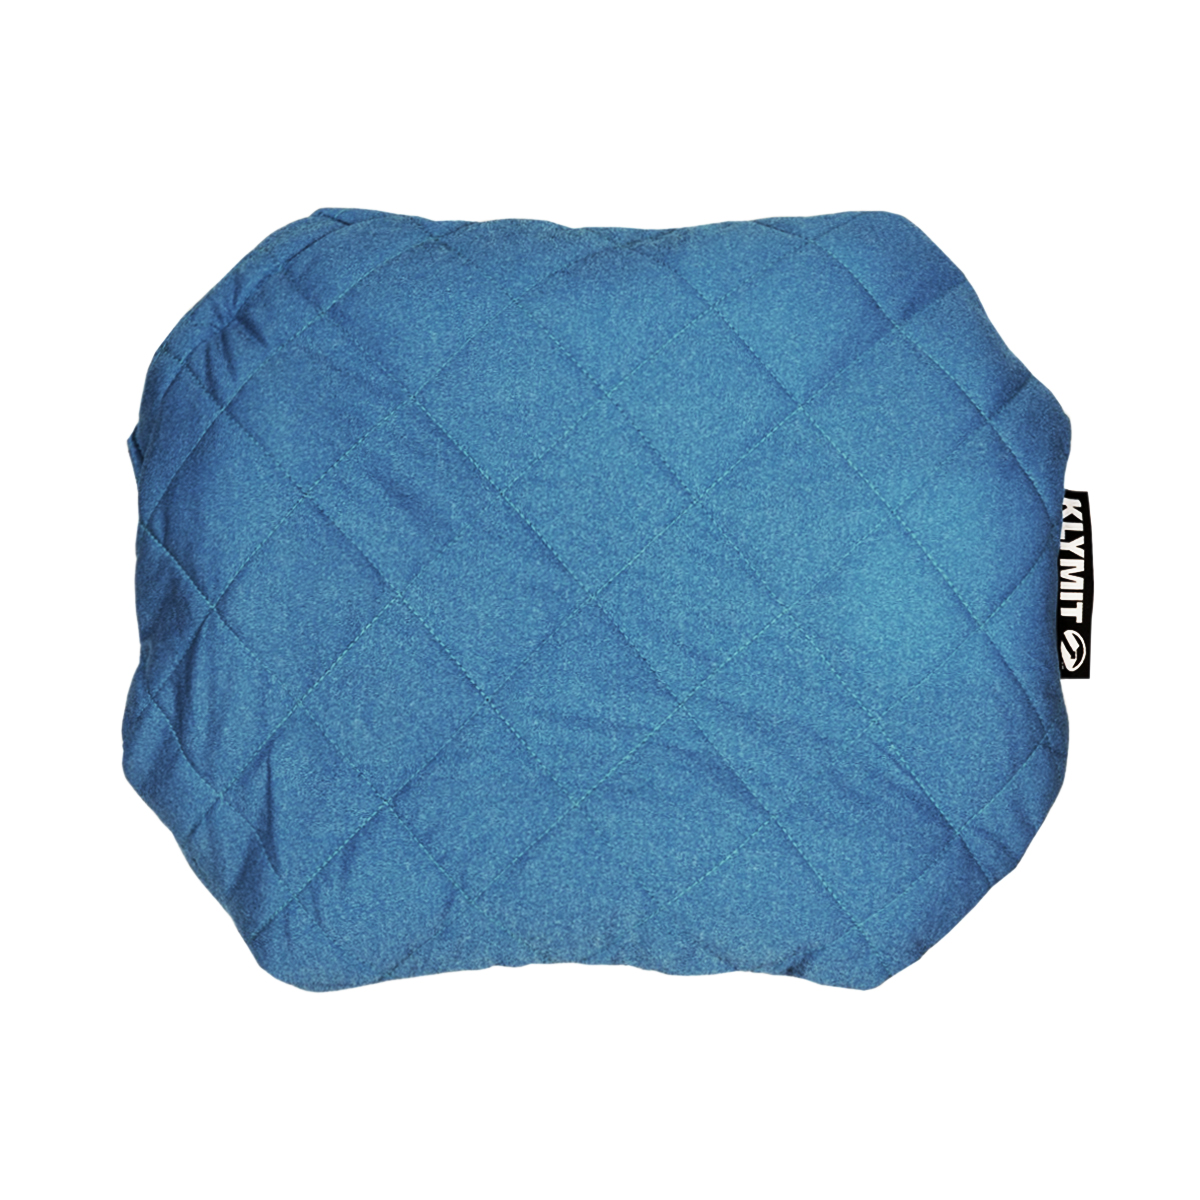 Klymit Quilted Pillow X 12hpgr01c 15 Off Campsaver